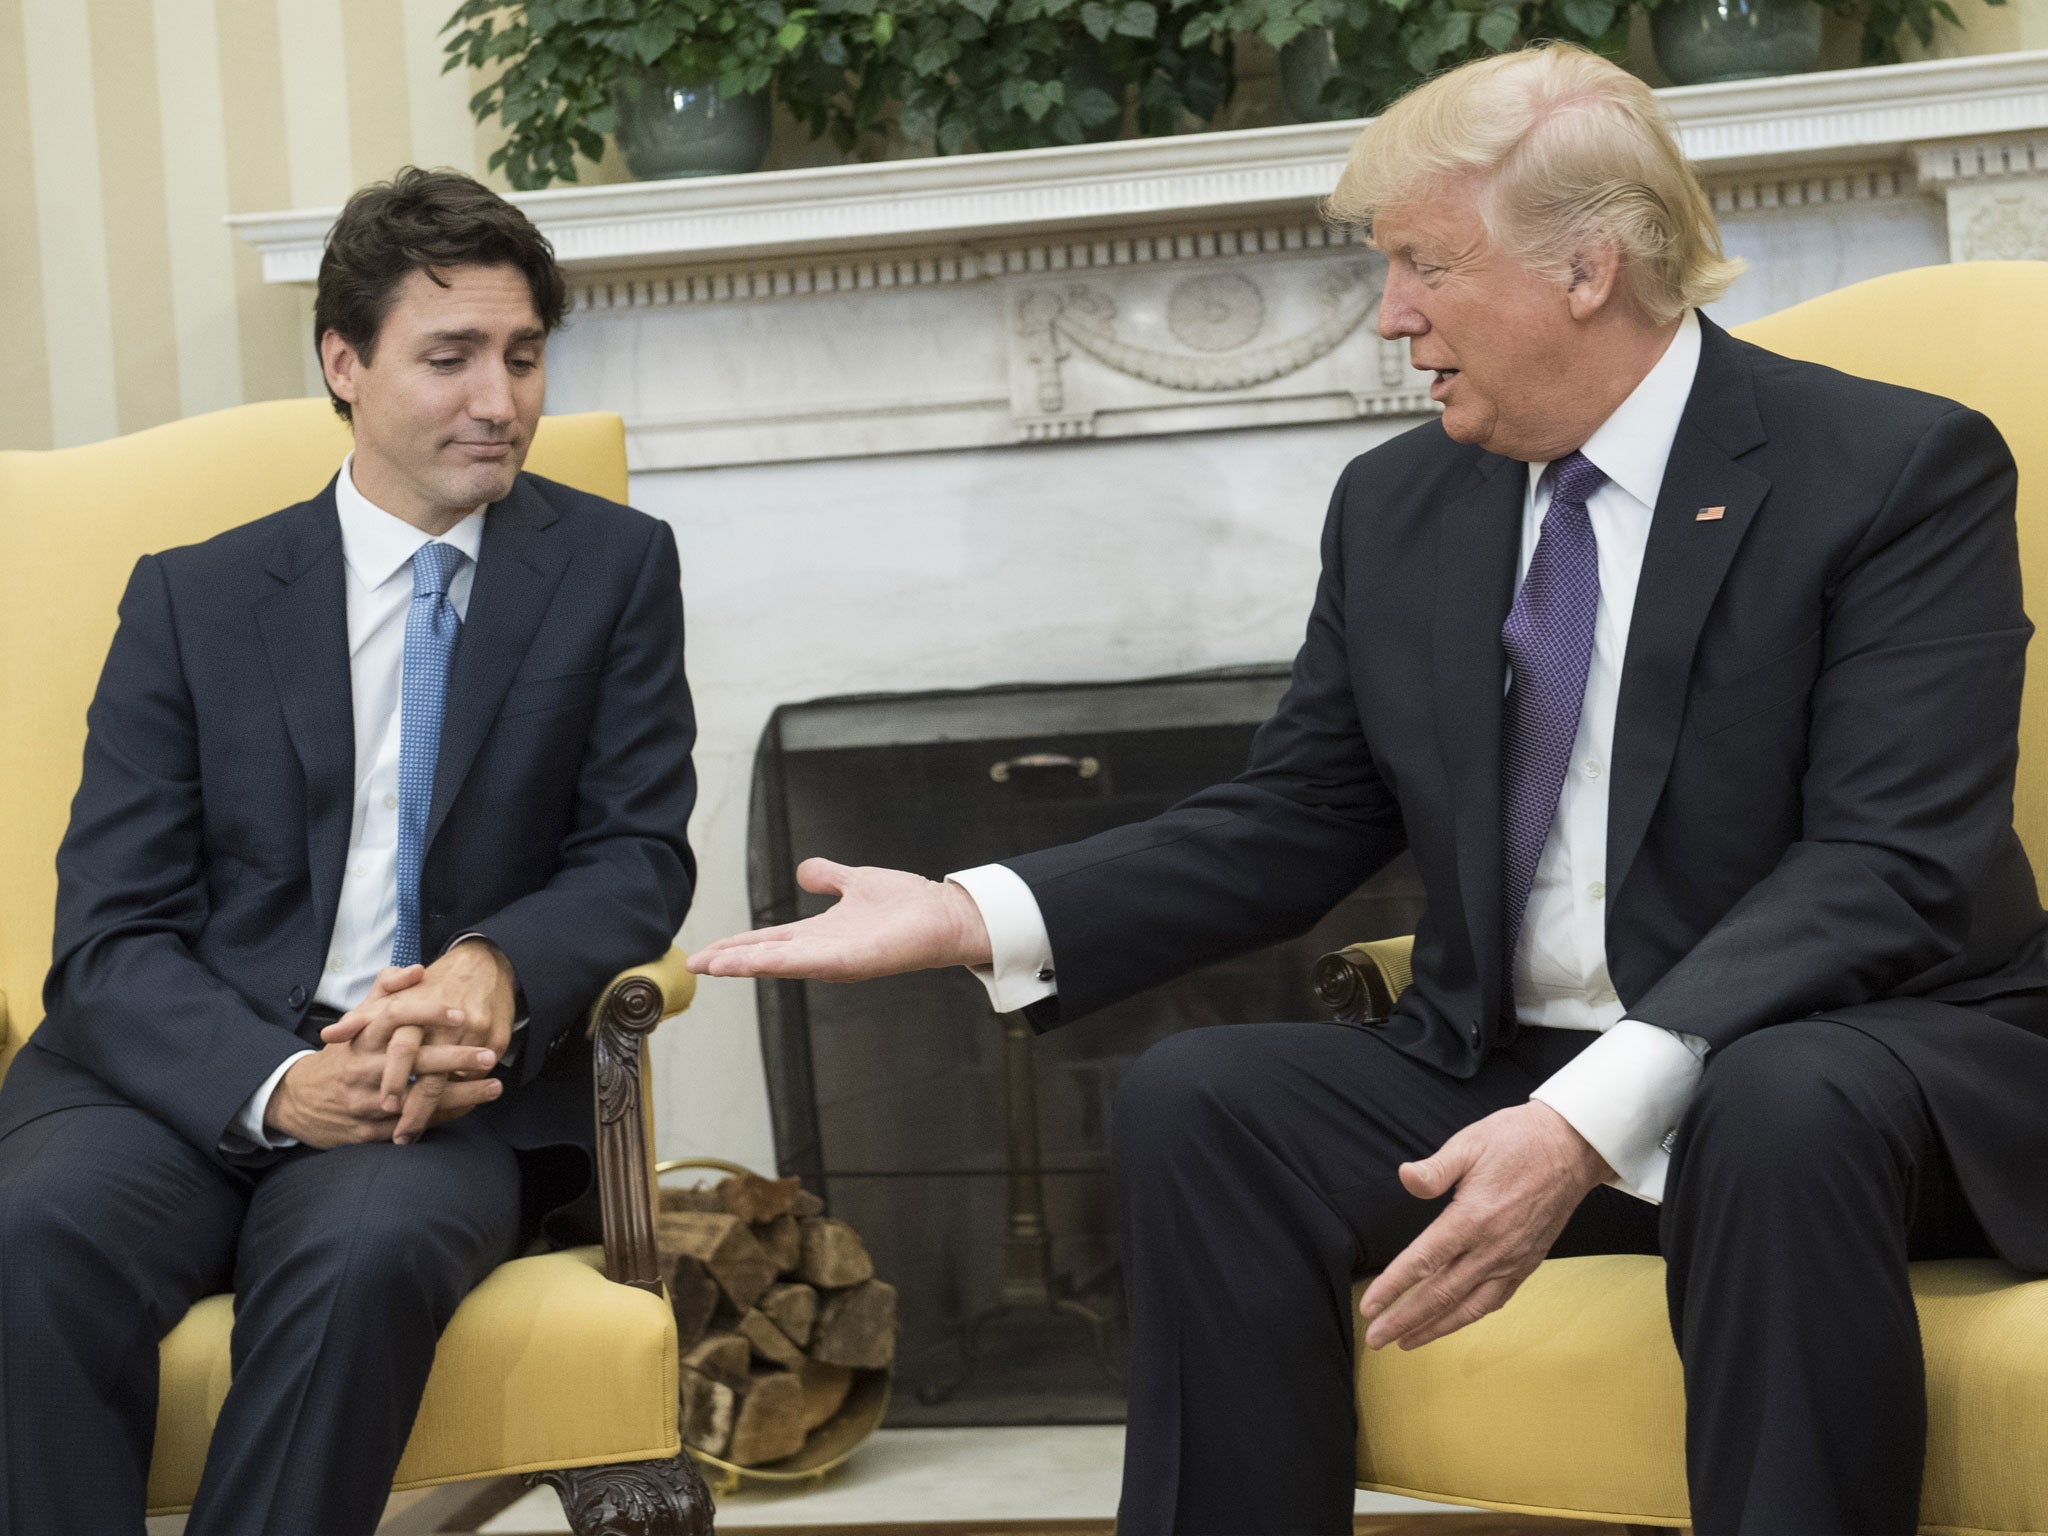 Donald Trump extends his hand to Prime Minister Justin Trudeau of Canada during a meeting in the Oval Office